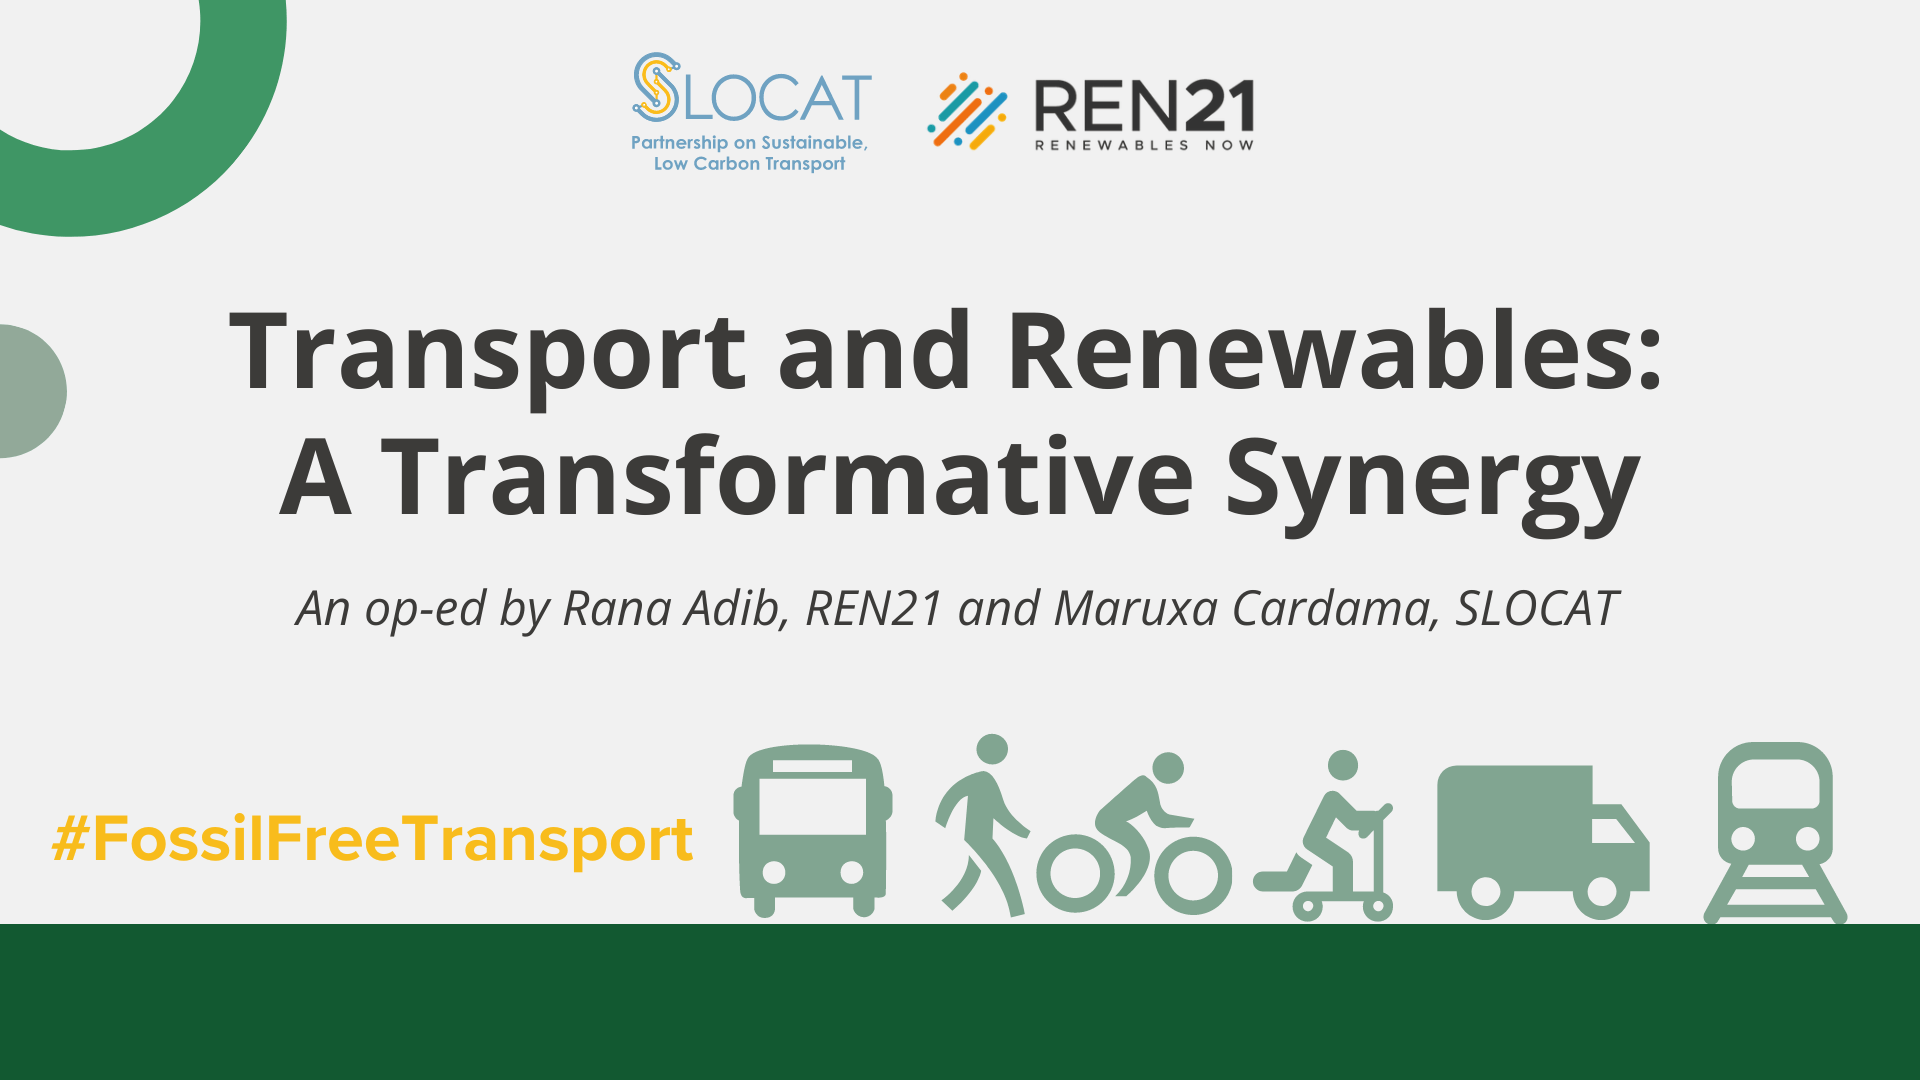 Transport and Renewables: A Transformative Synergy